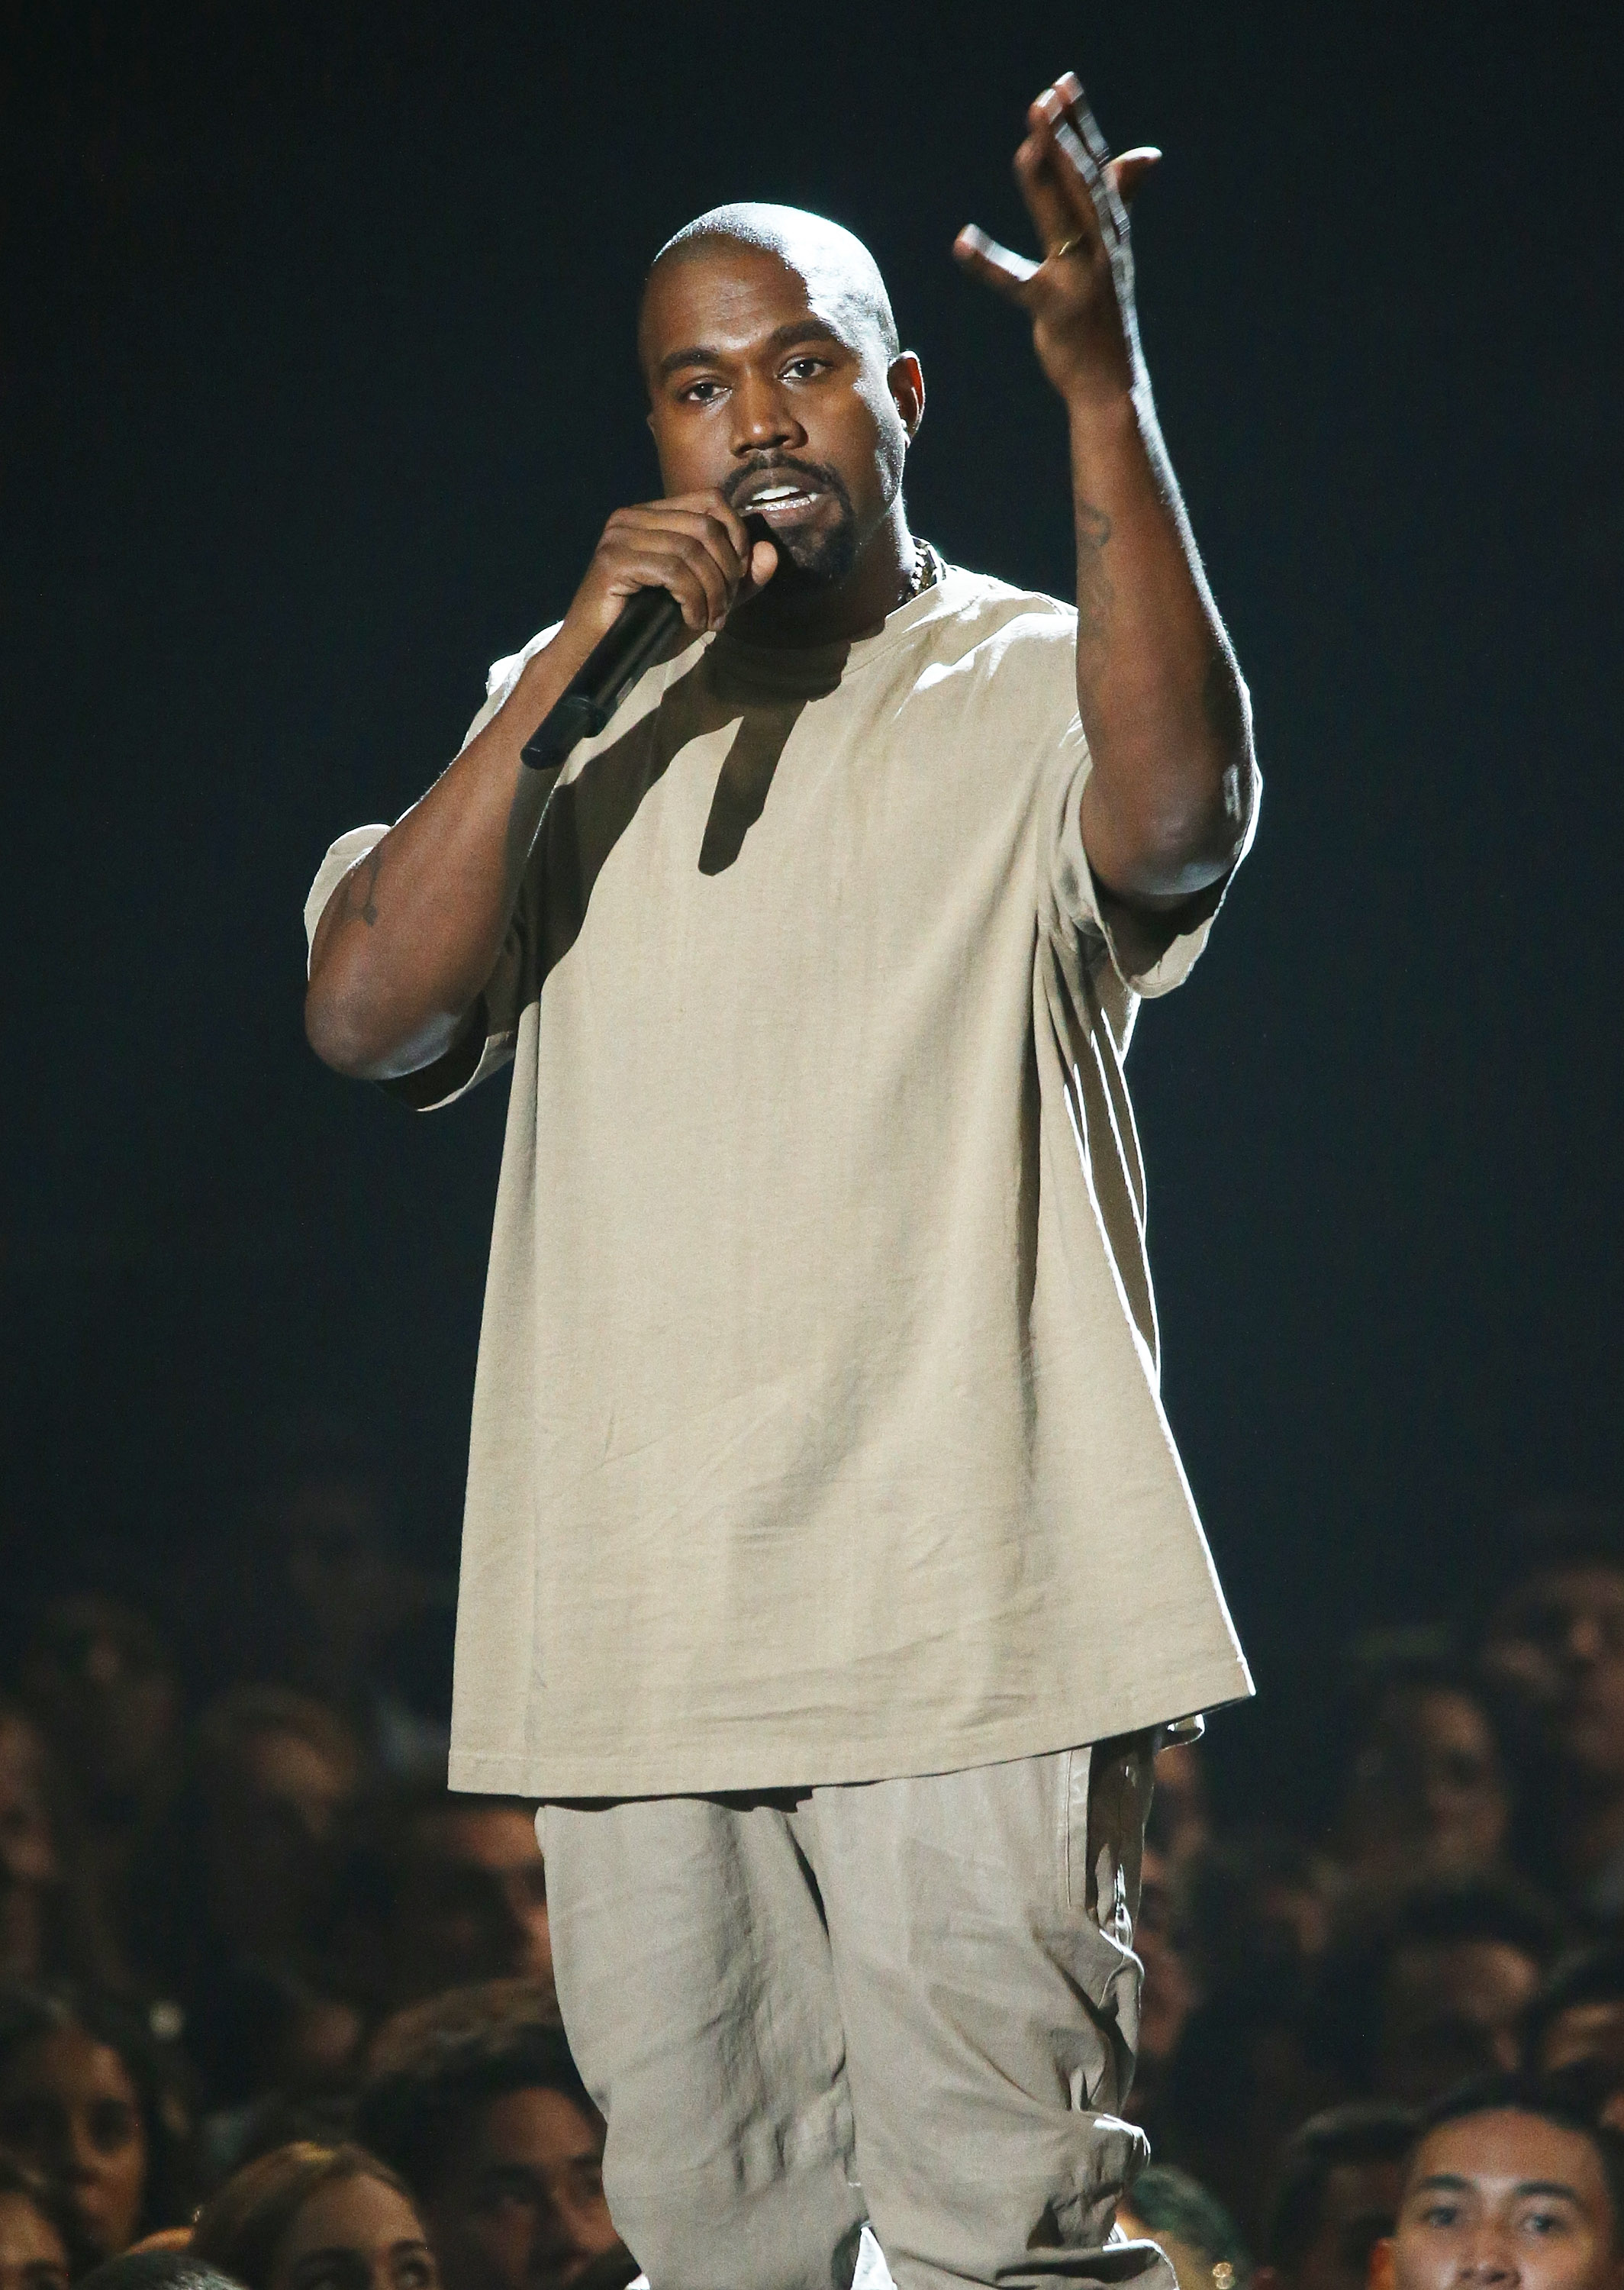 Kanye West at the 2015 MTV Video Music Awards in Los Angeles on Aug. 30, 2015.